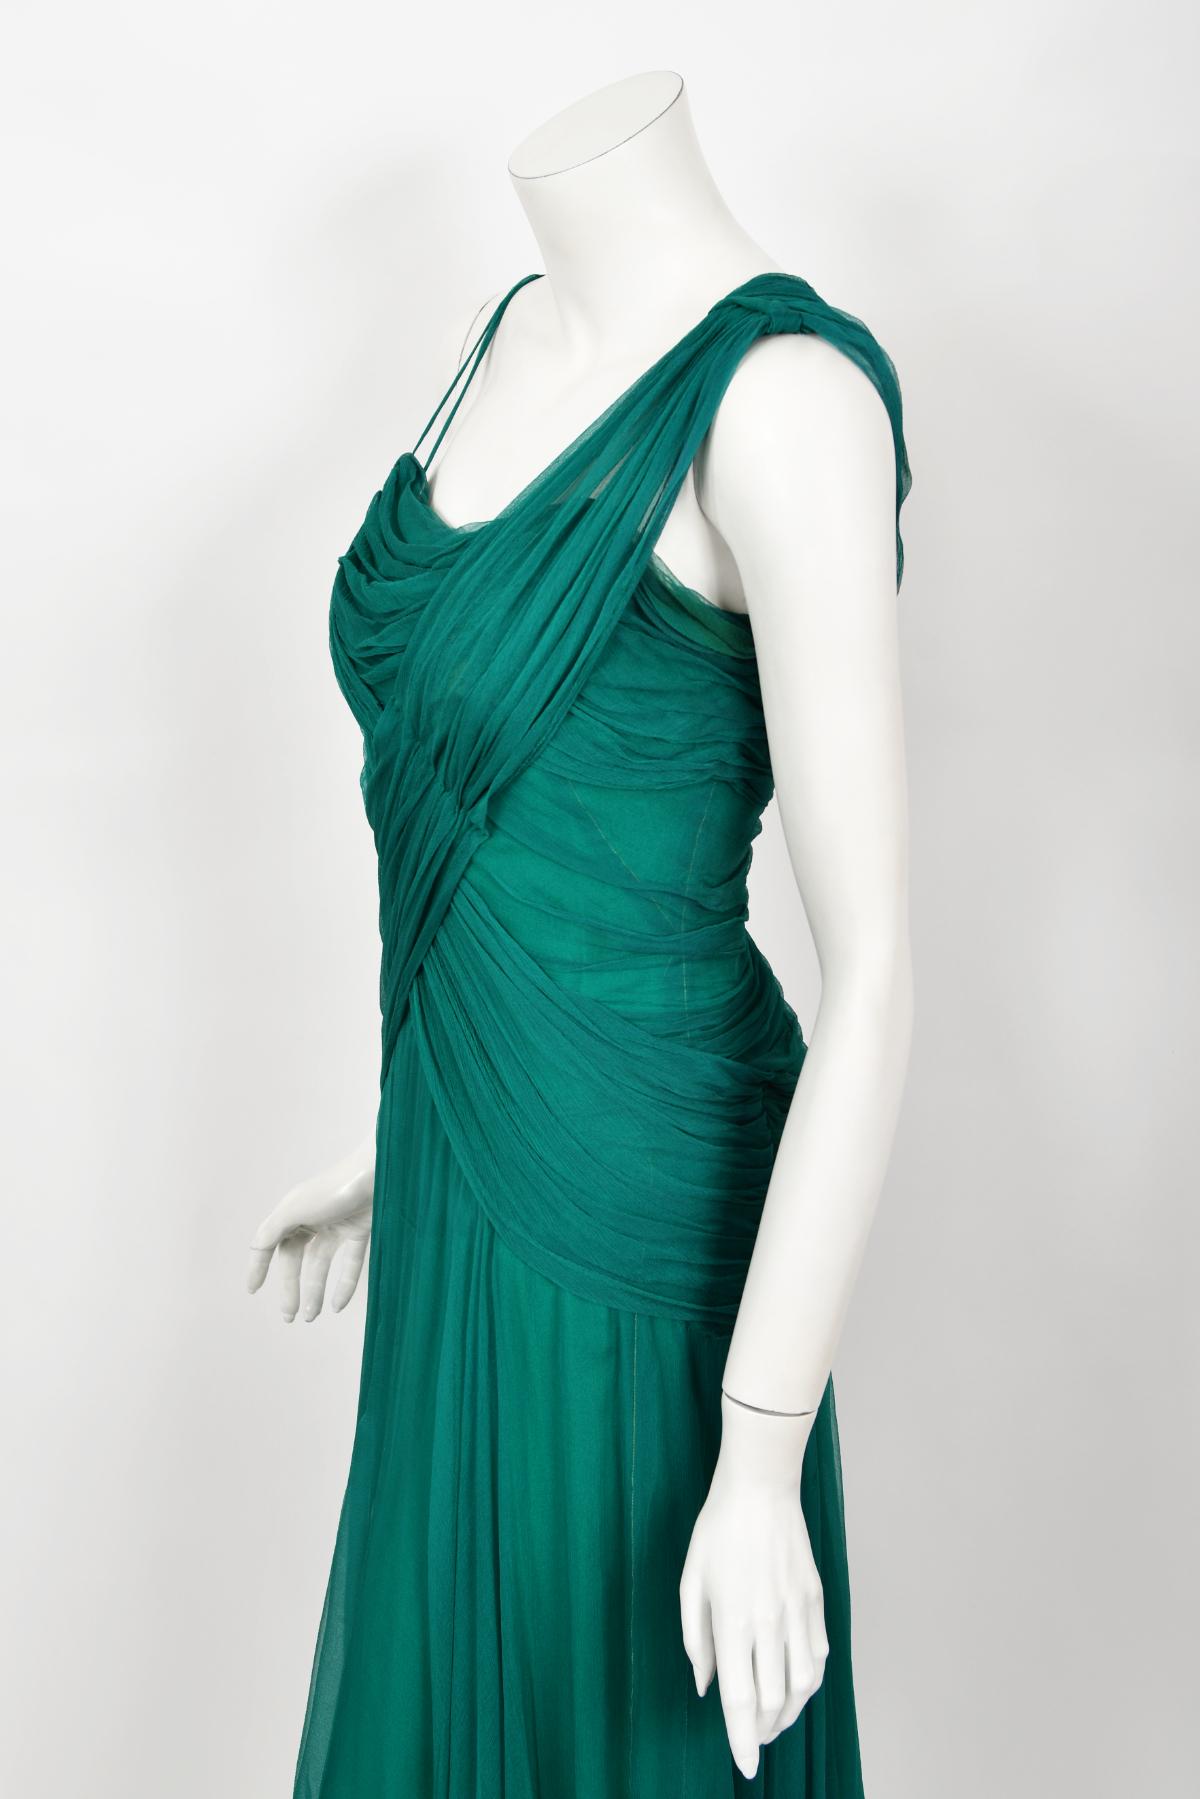 Vintage 1950's Irene Lentz Couture Teal Green Draped Silk Grecian Goddess Gown For Sale 3